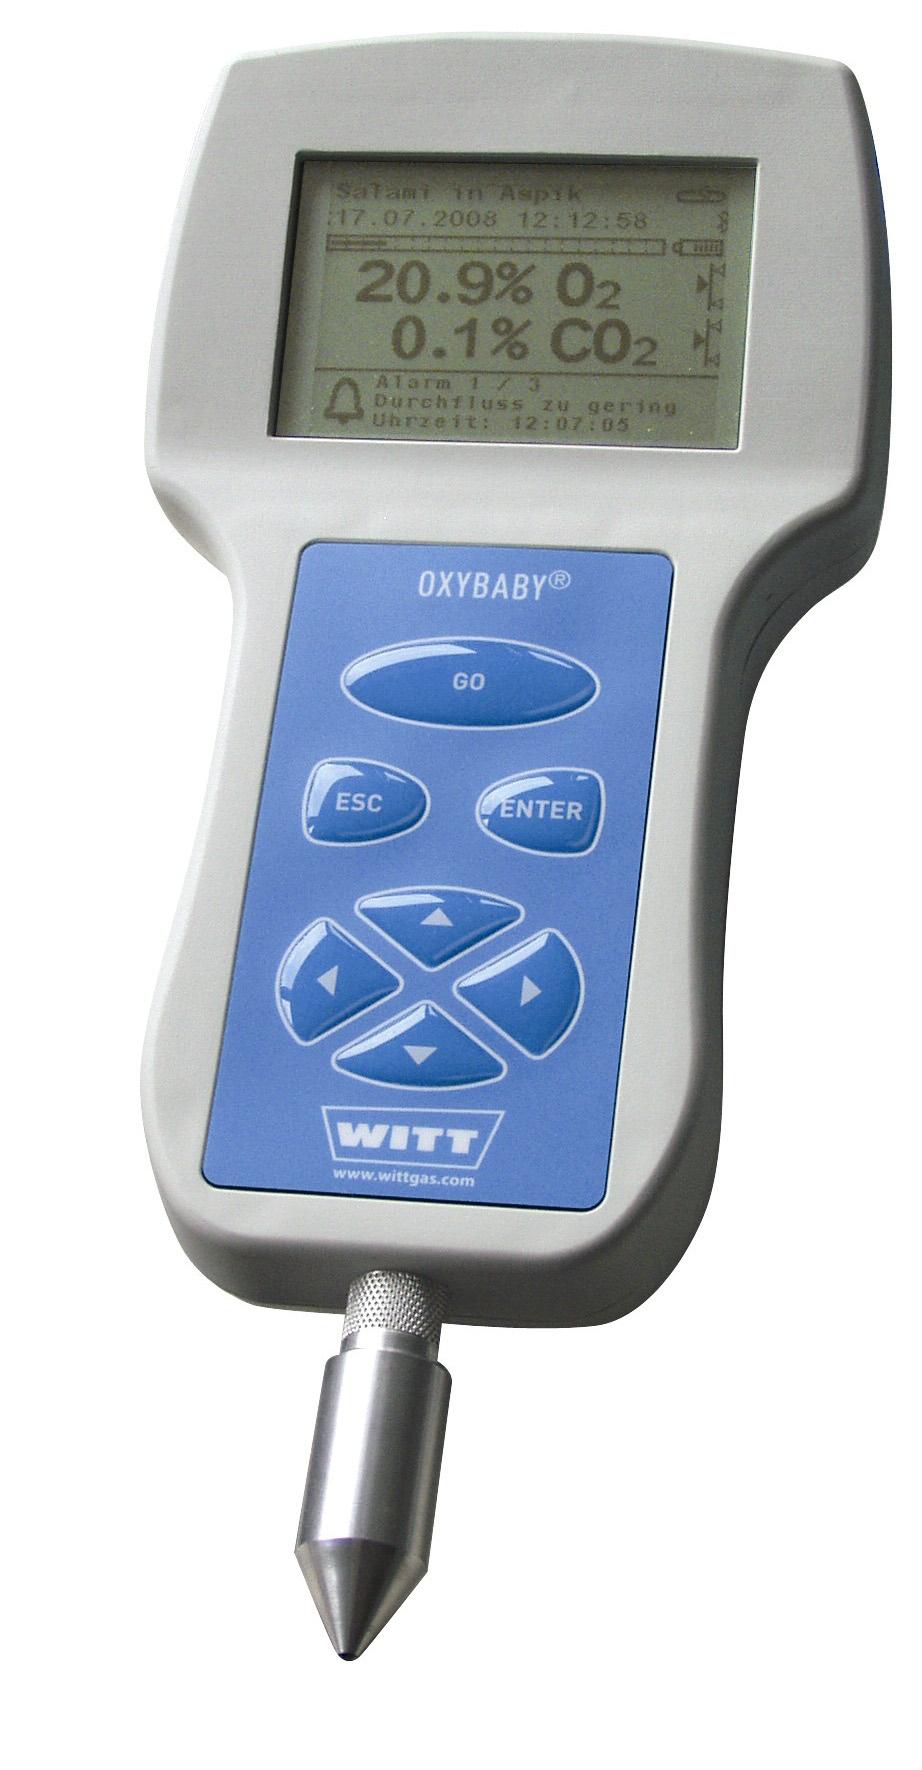 GAs analysers Oxybaby 6.0 for or /C Cordless hand held oxygen or combined oxygen and carbon dioxide analyser for checking modified atmospheres in food packs.